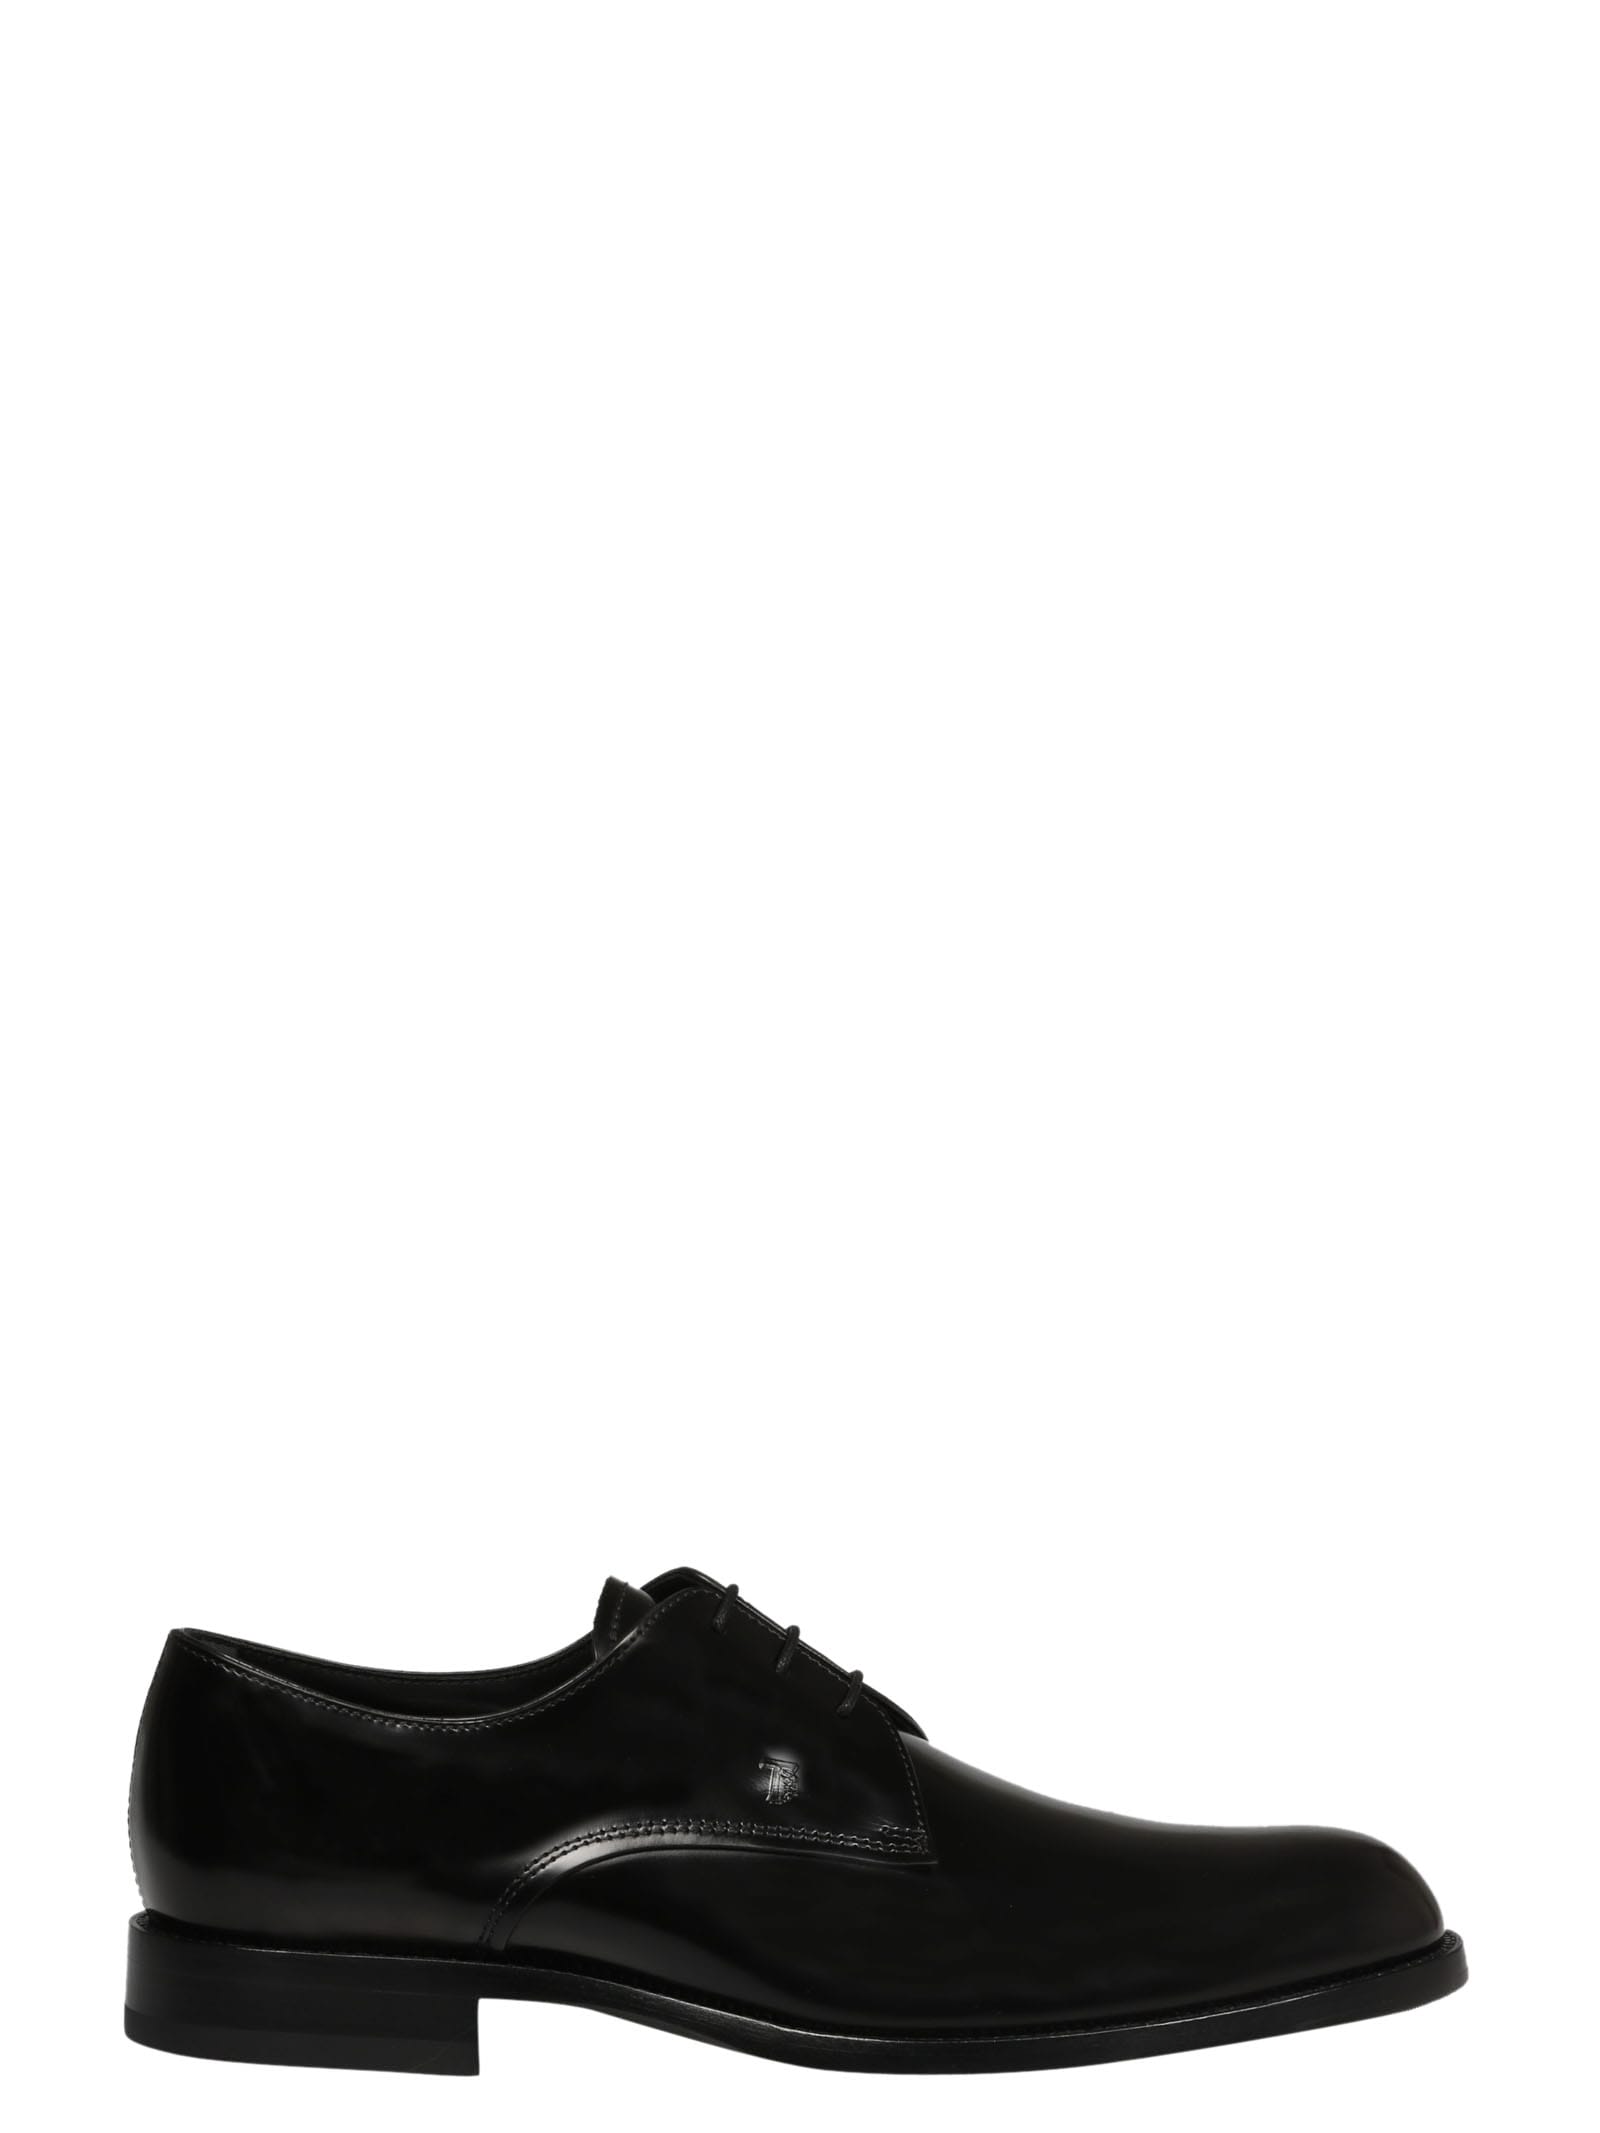 Tods Oxford Shoes